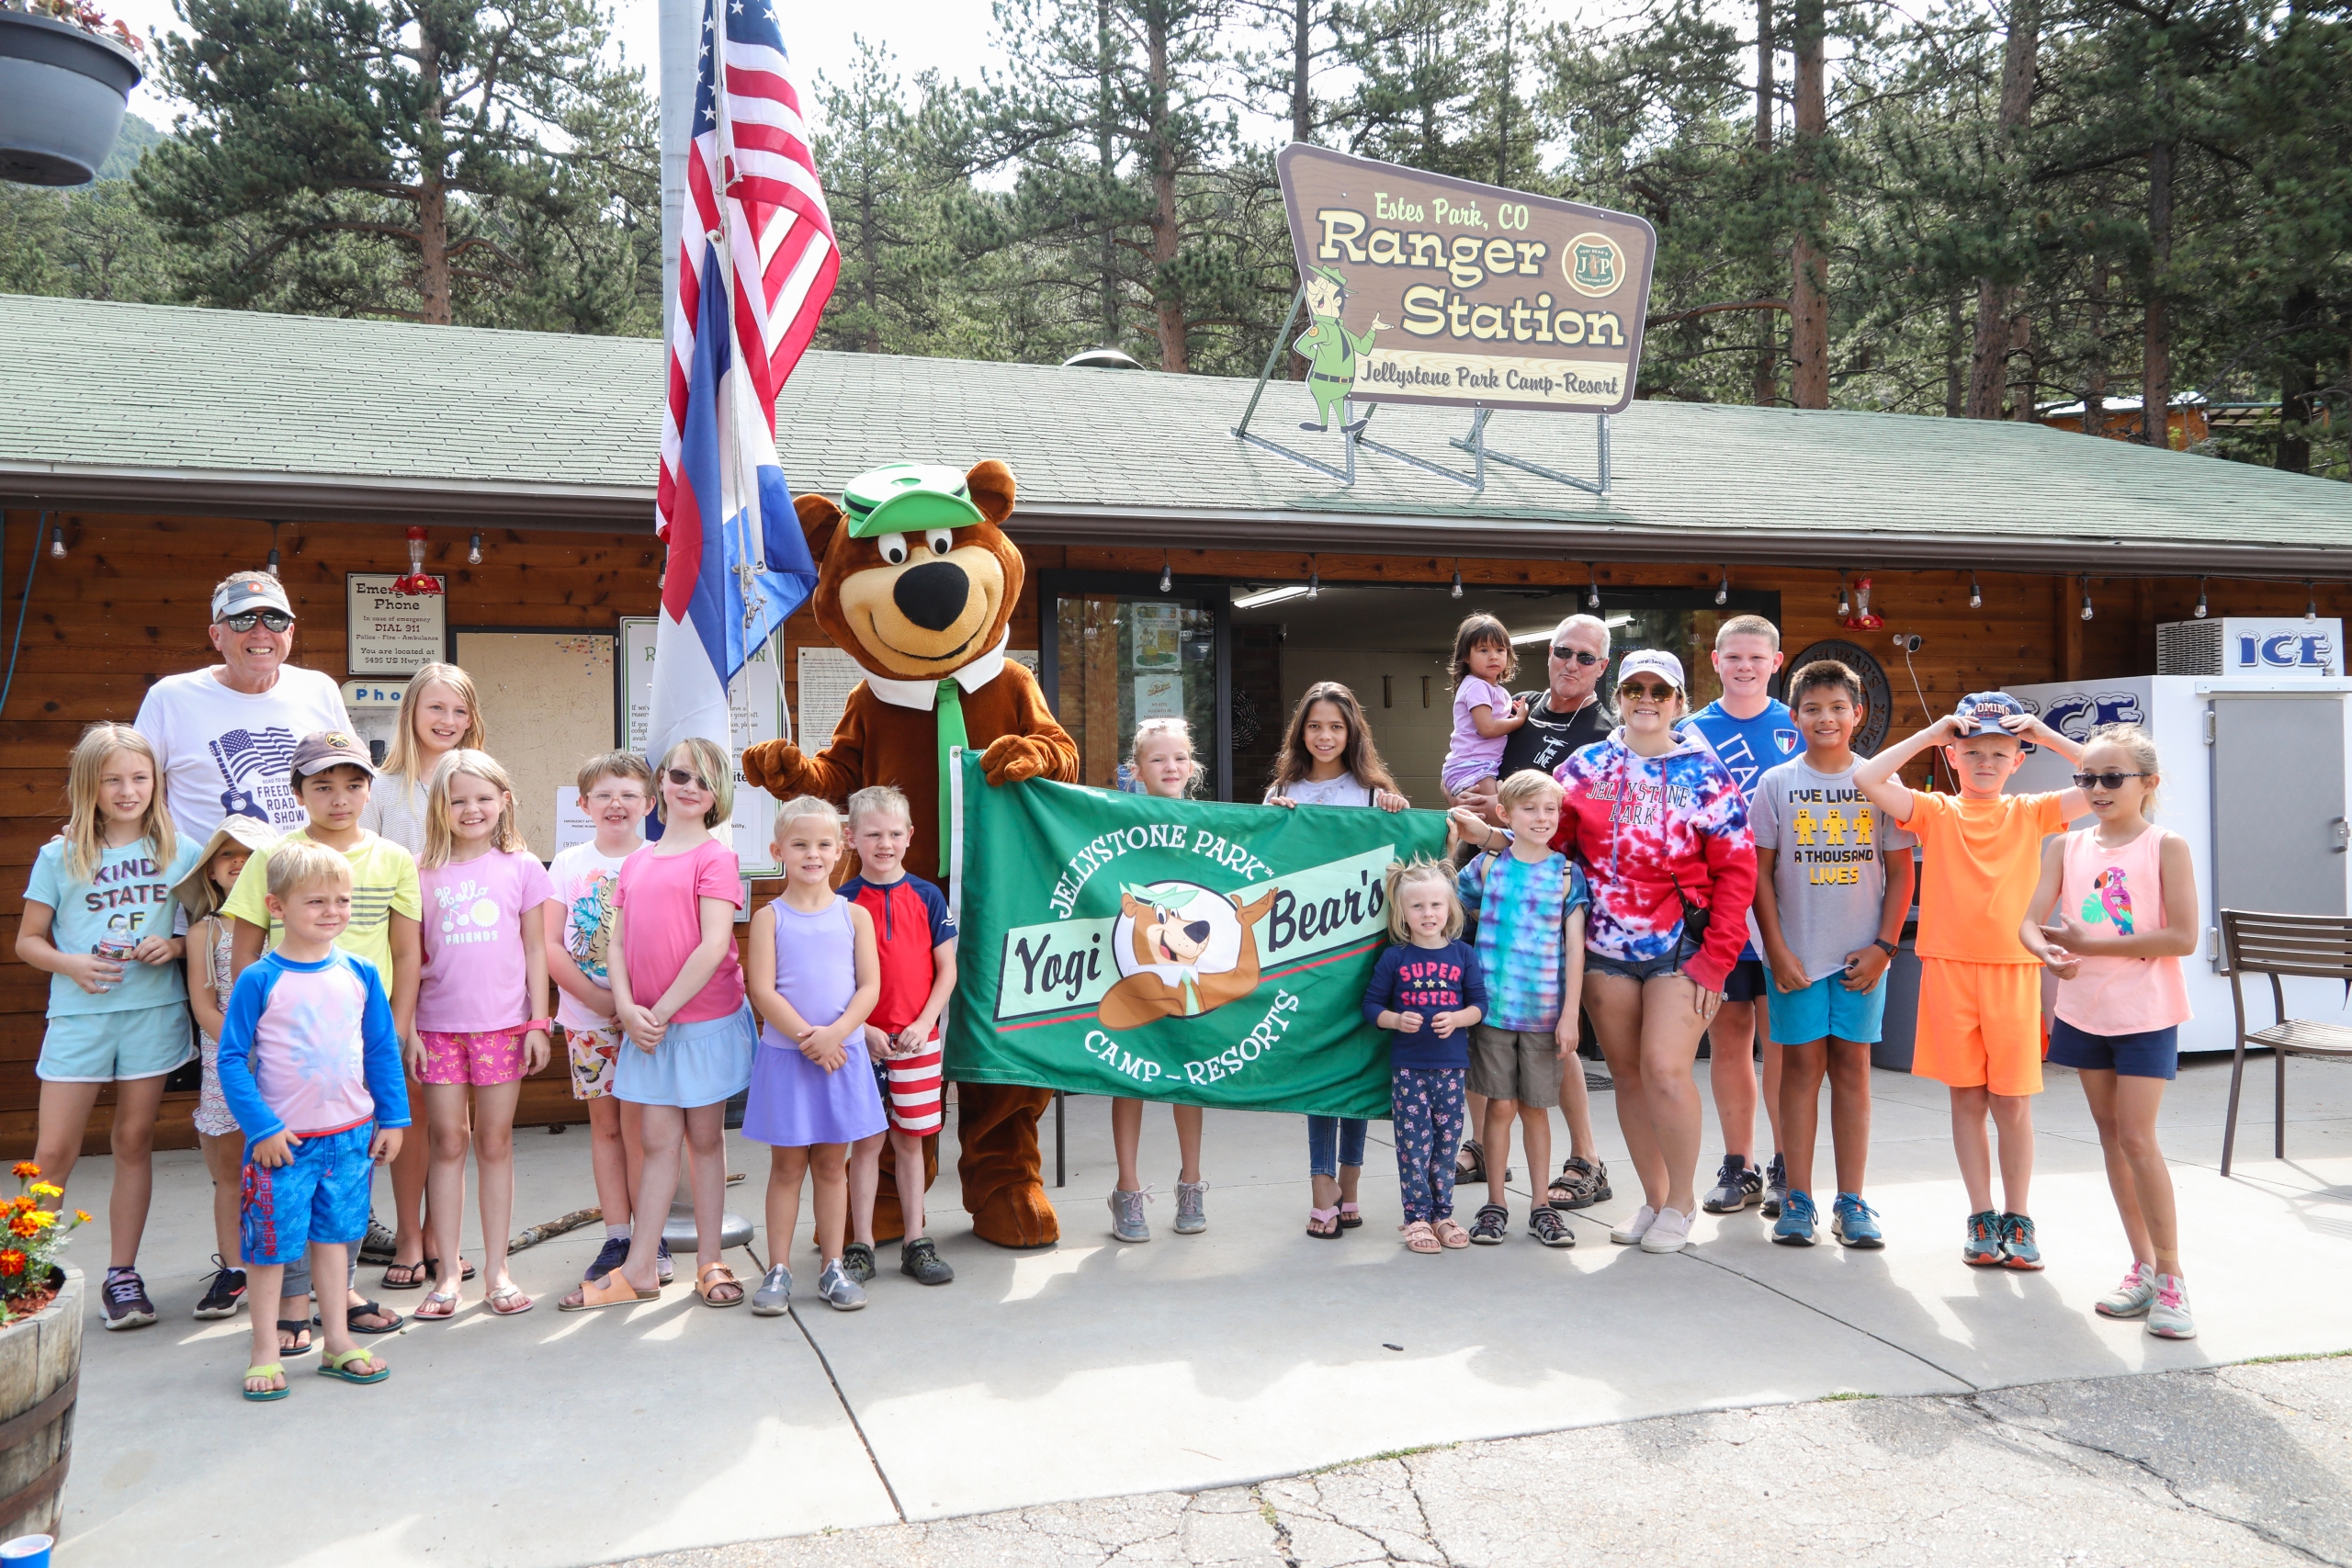 Yogi Bear holding a Camp Jellystone flag posing with a group of campers